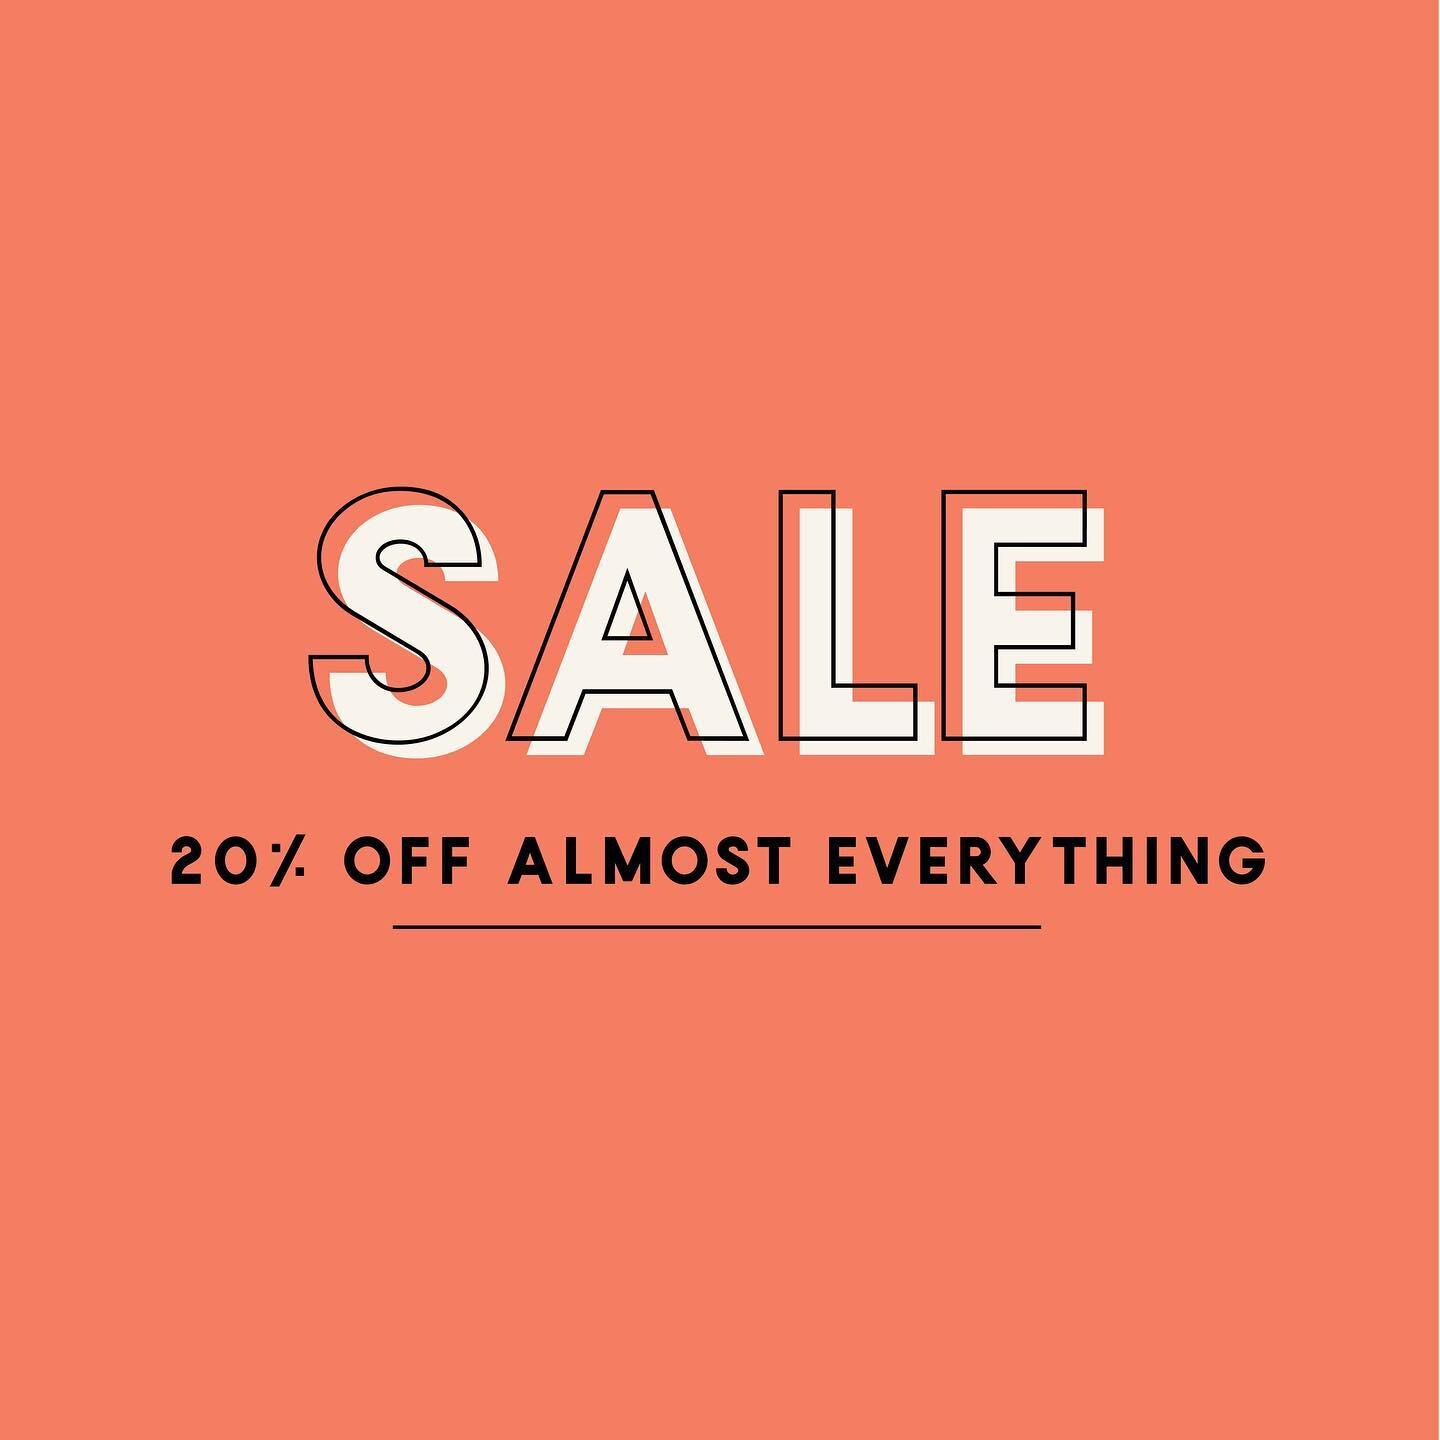 it&rsquo;s that time of year! we&rsquo;re closing out the season with a huge sale! 20% off almost everything (excludes the new Atelier Brunette collection and Hokkoh poppies fabric). prices as marked. sale ends 1/3/22. #shopstitchcraft #modernmakers 